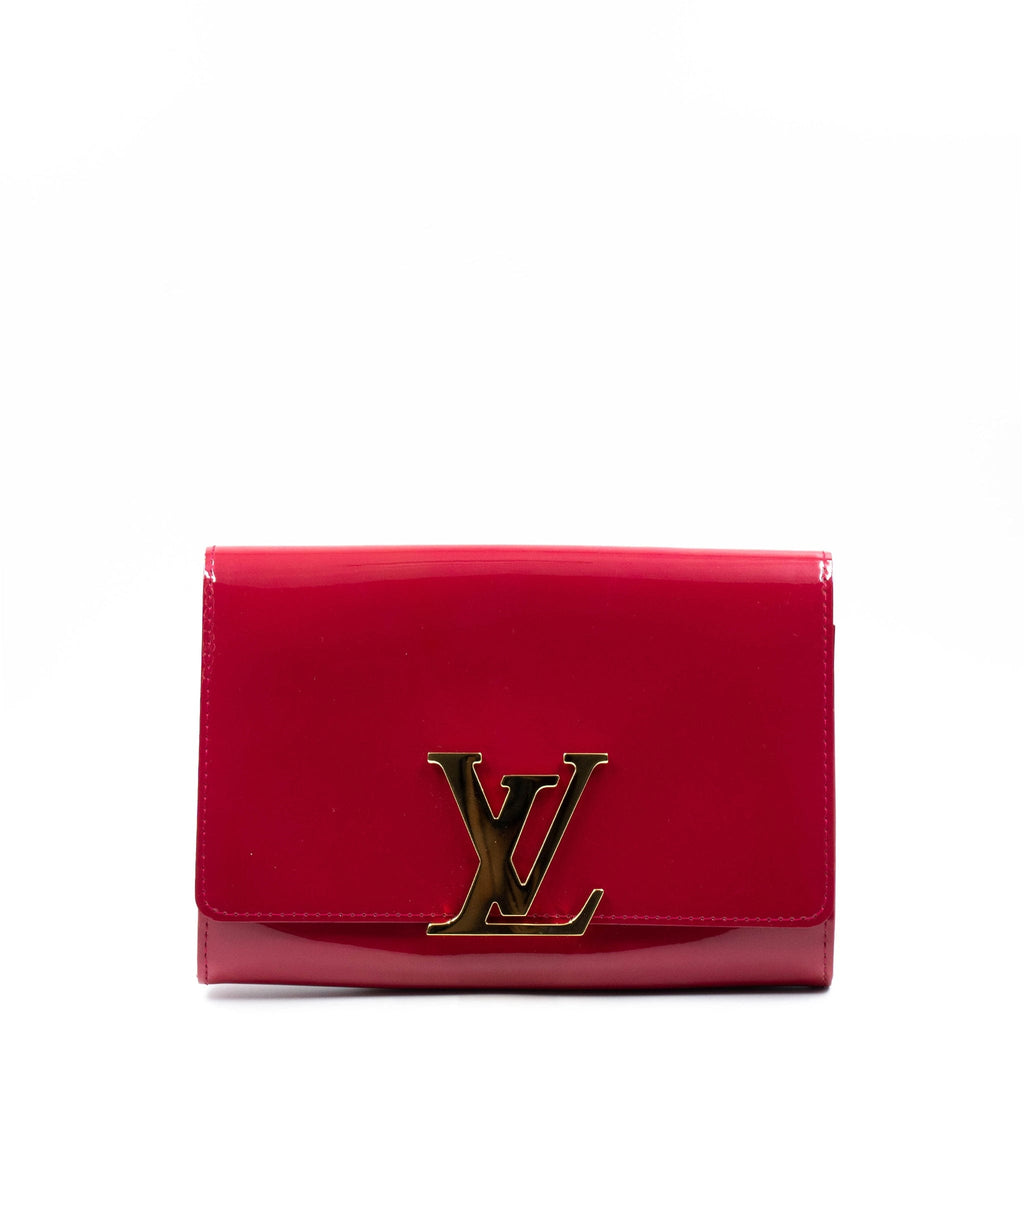 Louis Vuitton Louise patent leather clutch bag in indian rose